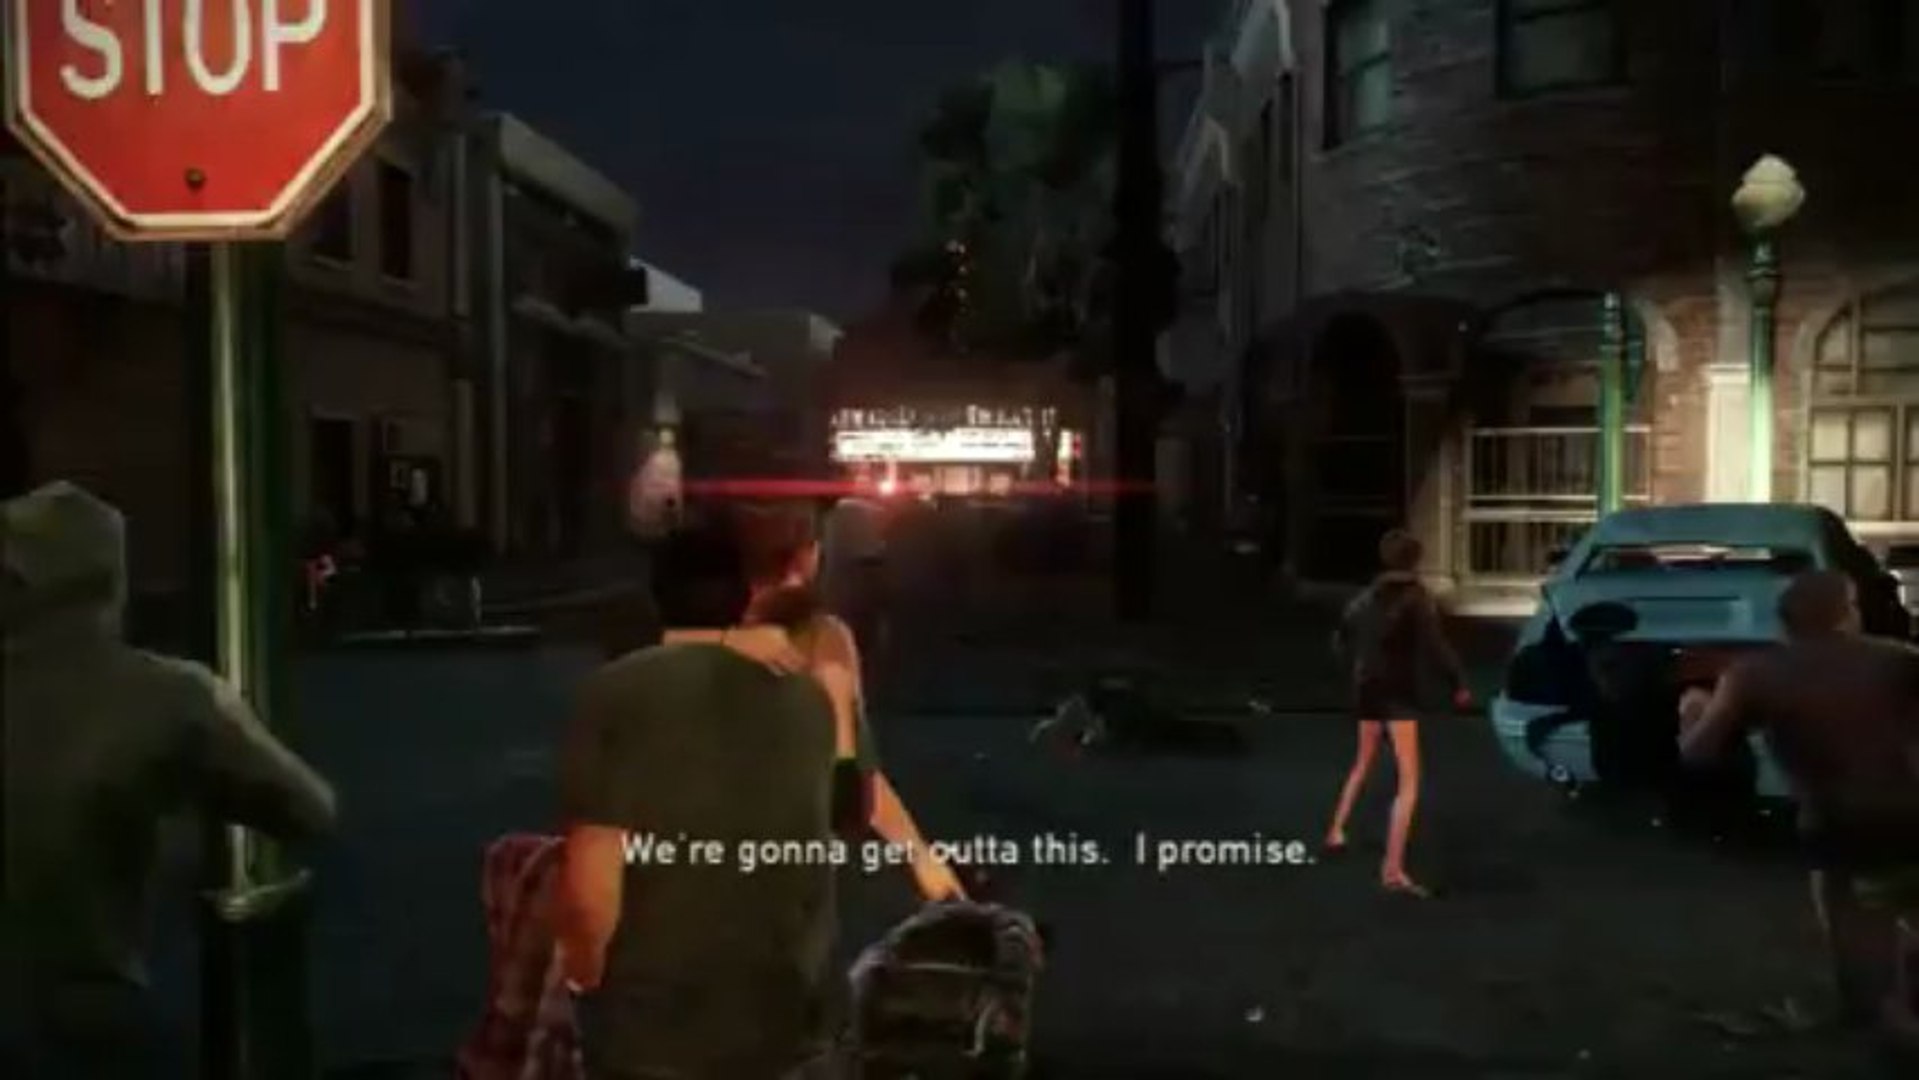 The Last of Us (PS3) -~- Gameplay Walkthrough / Playthrough Part 1 -~- -  video Dailymotion